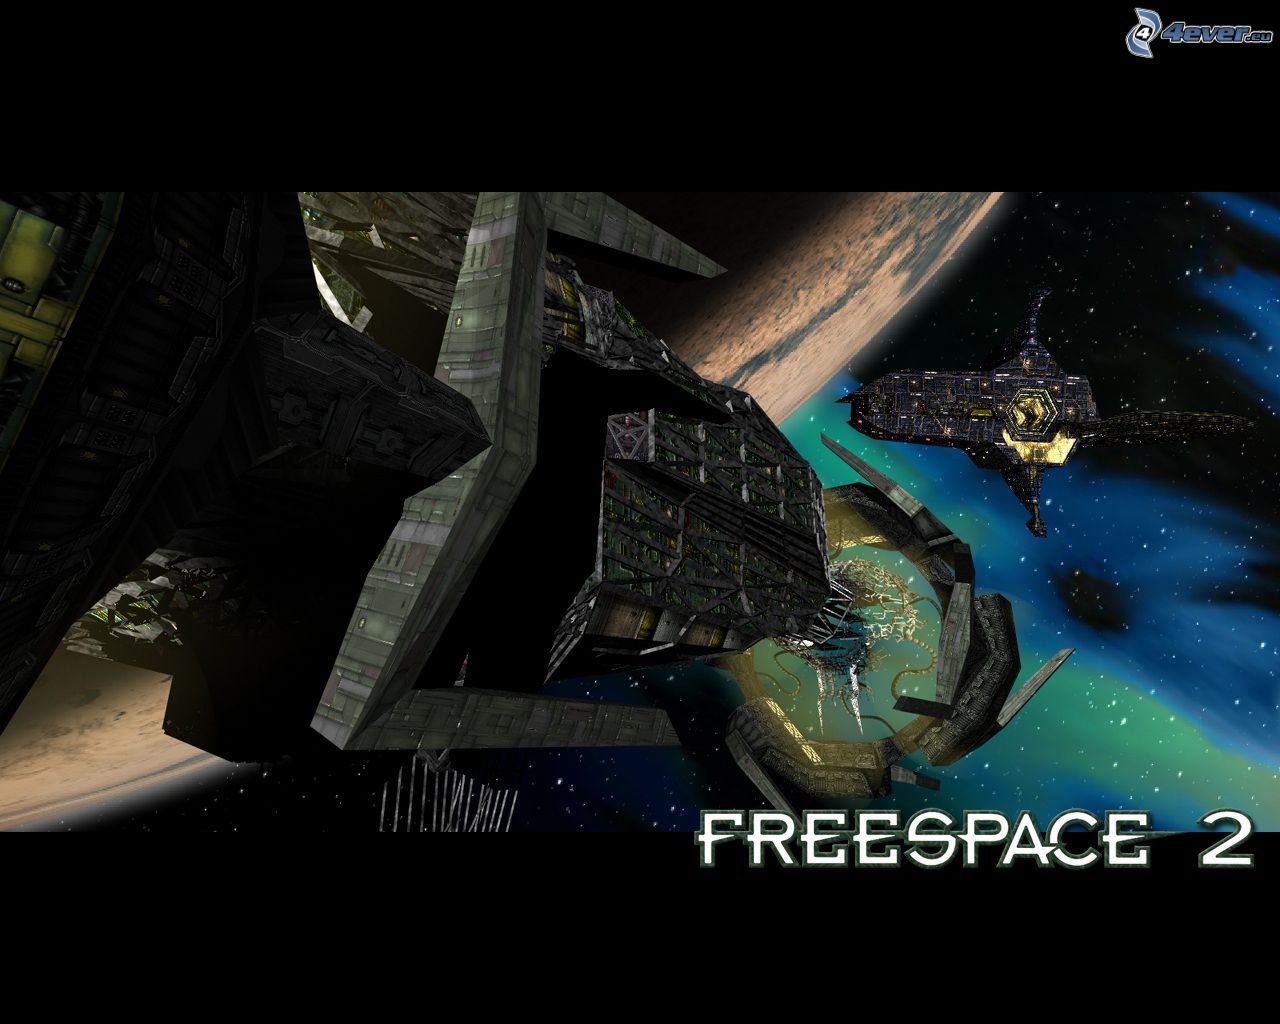 freespace 2 download free full version